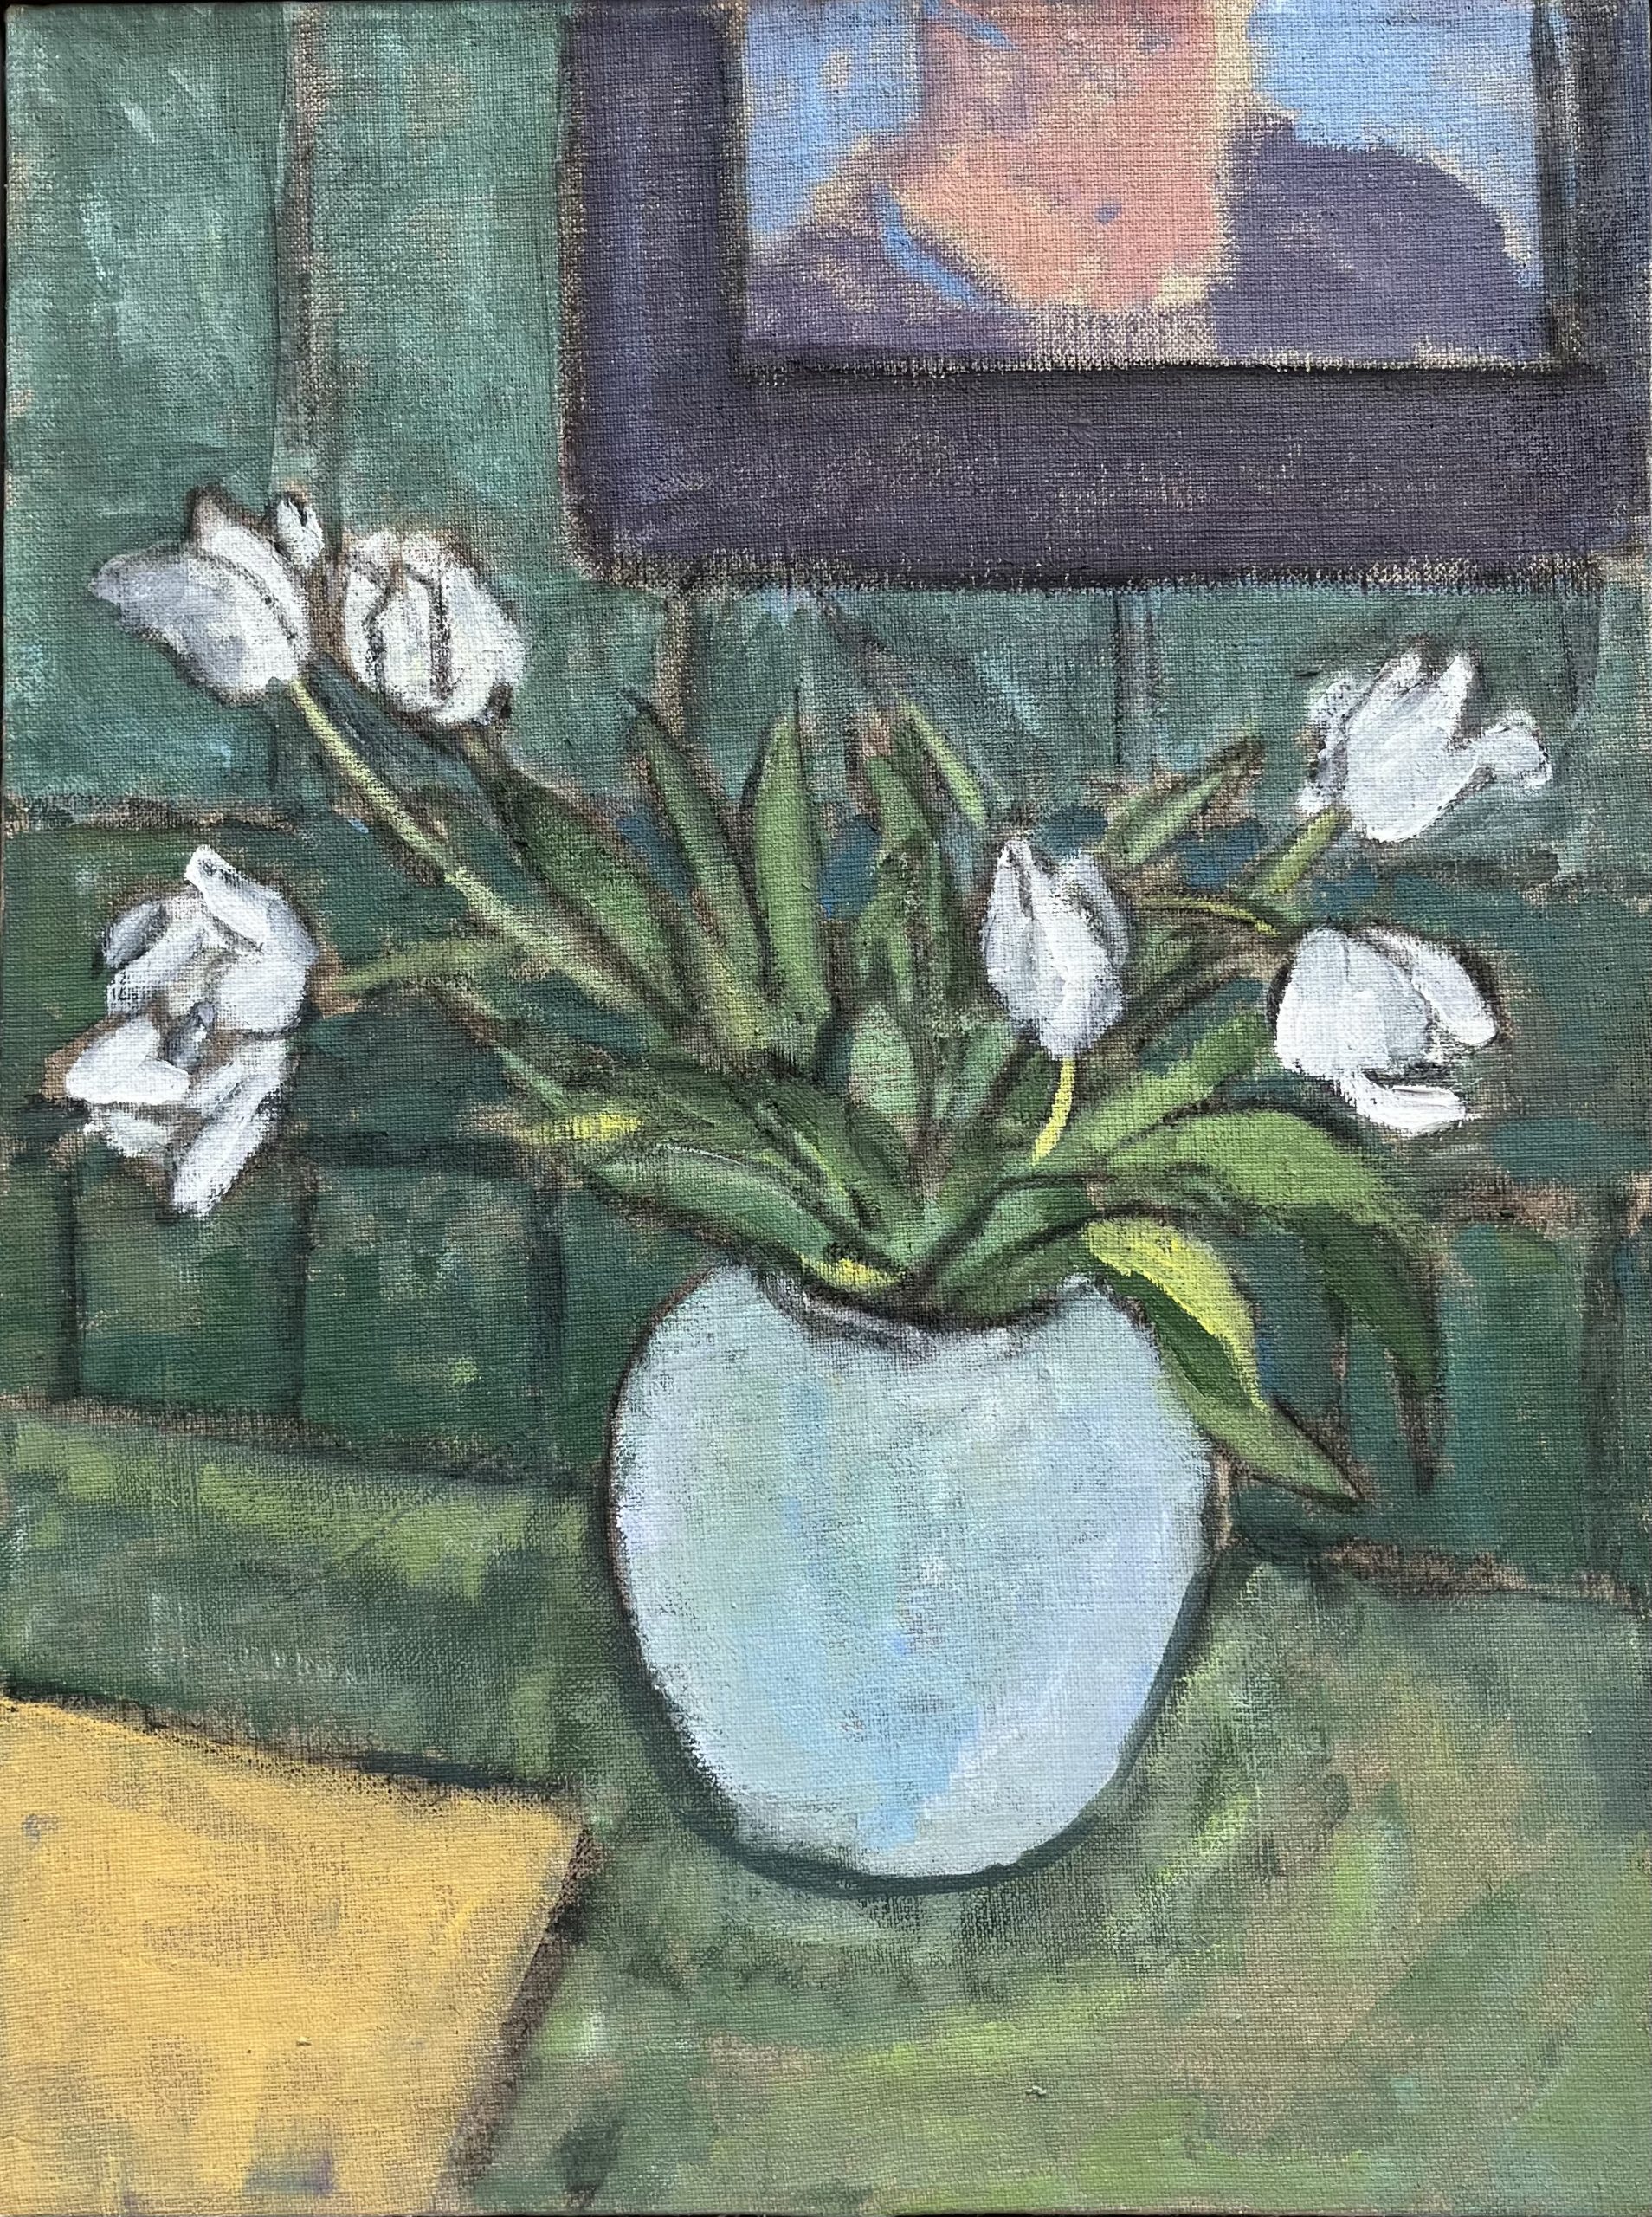 Michael Howard - Tulips in the Green Kitchen - oil/acrylic on canvas, size: 61x46cm £995